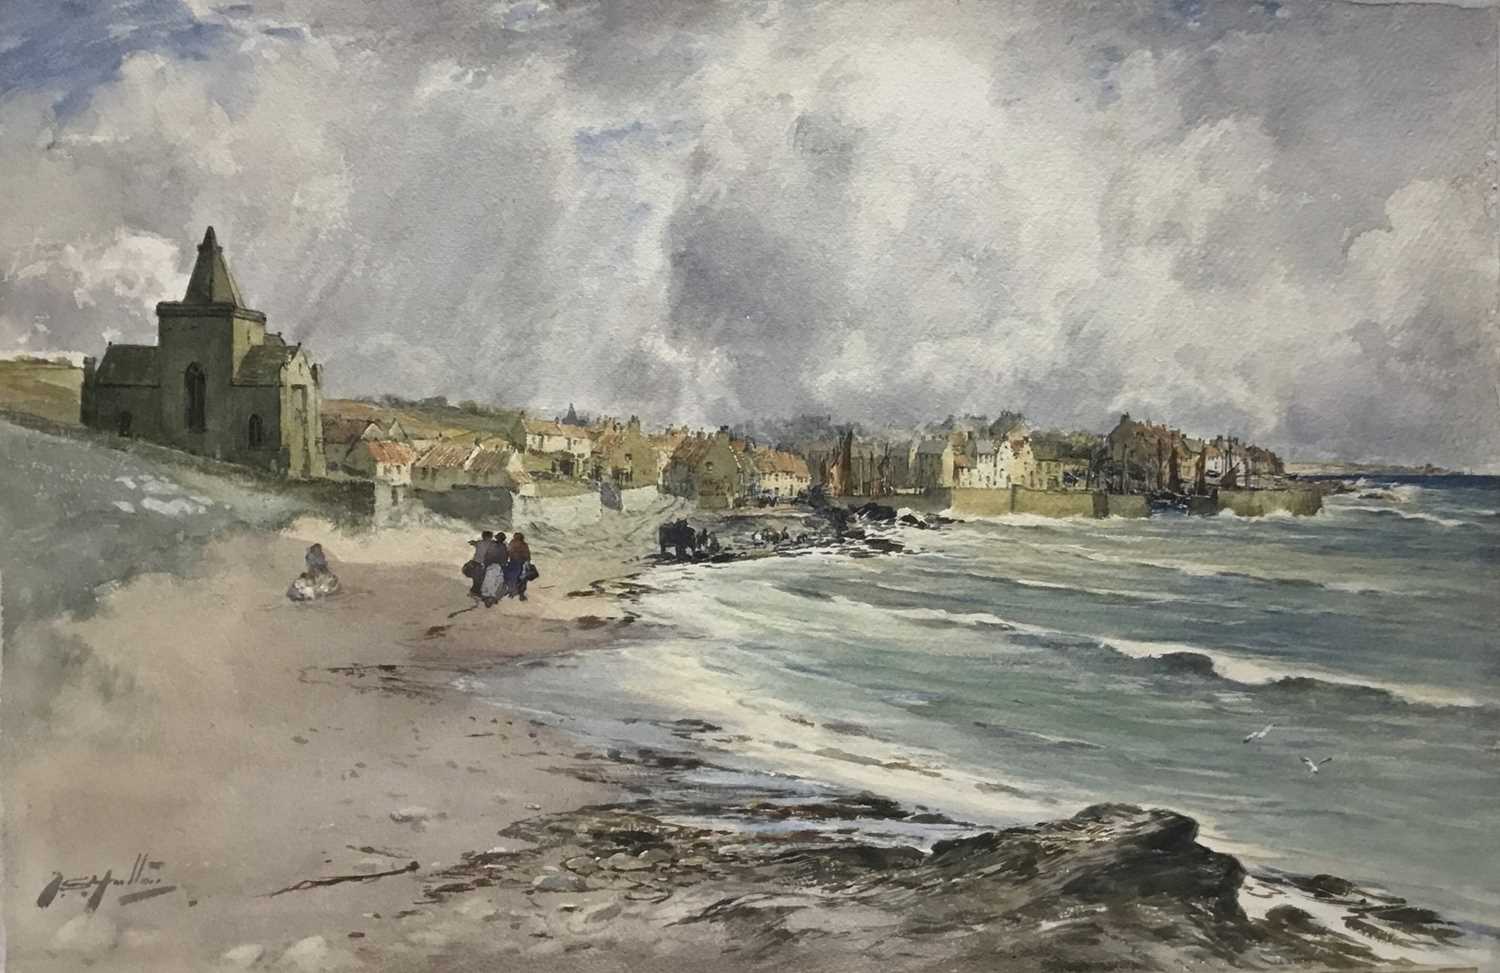 Lot 156 - Thomas Swift Hutton (c. 1860-1935) watercolour on board - St Monans, Fife Coast, signed, titled to label verso, 39 x 56cm